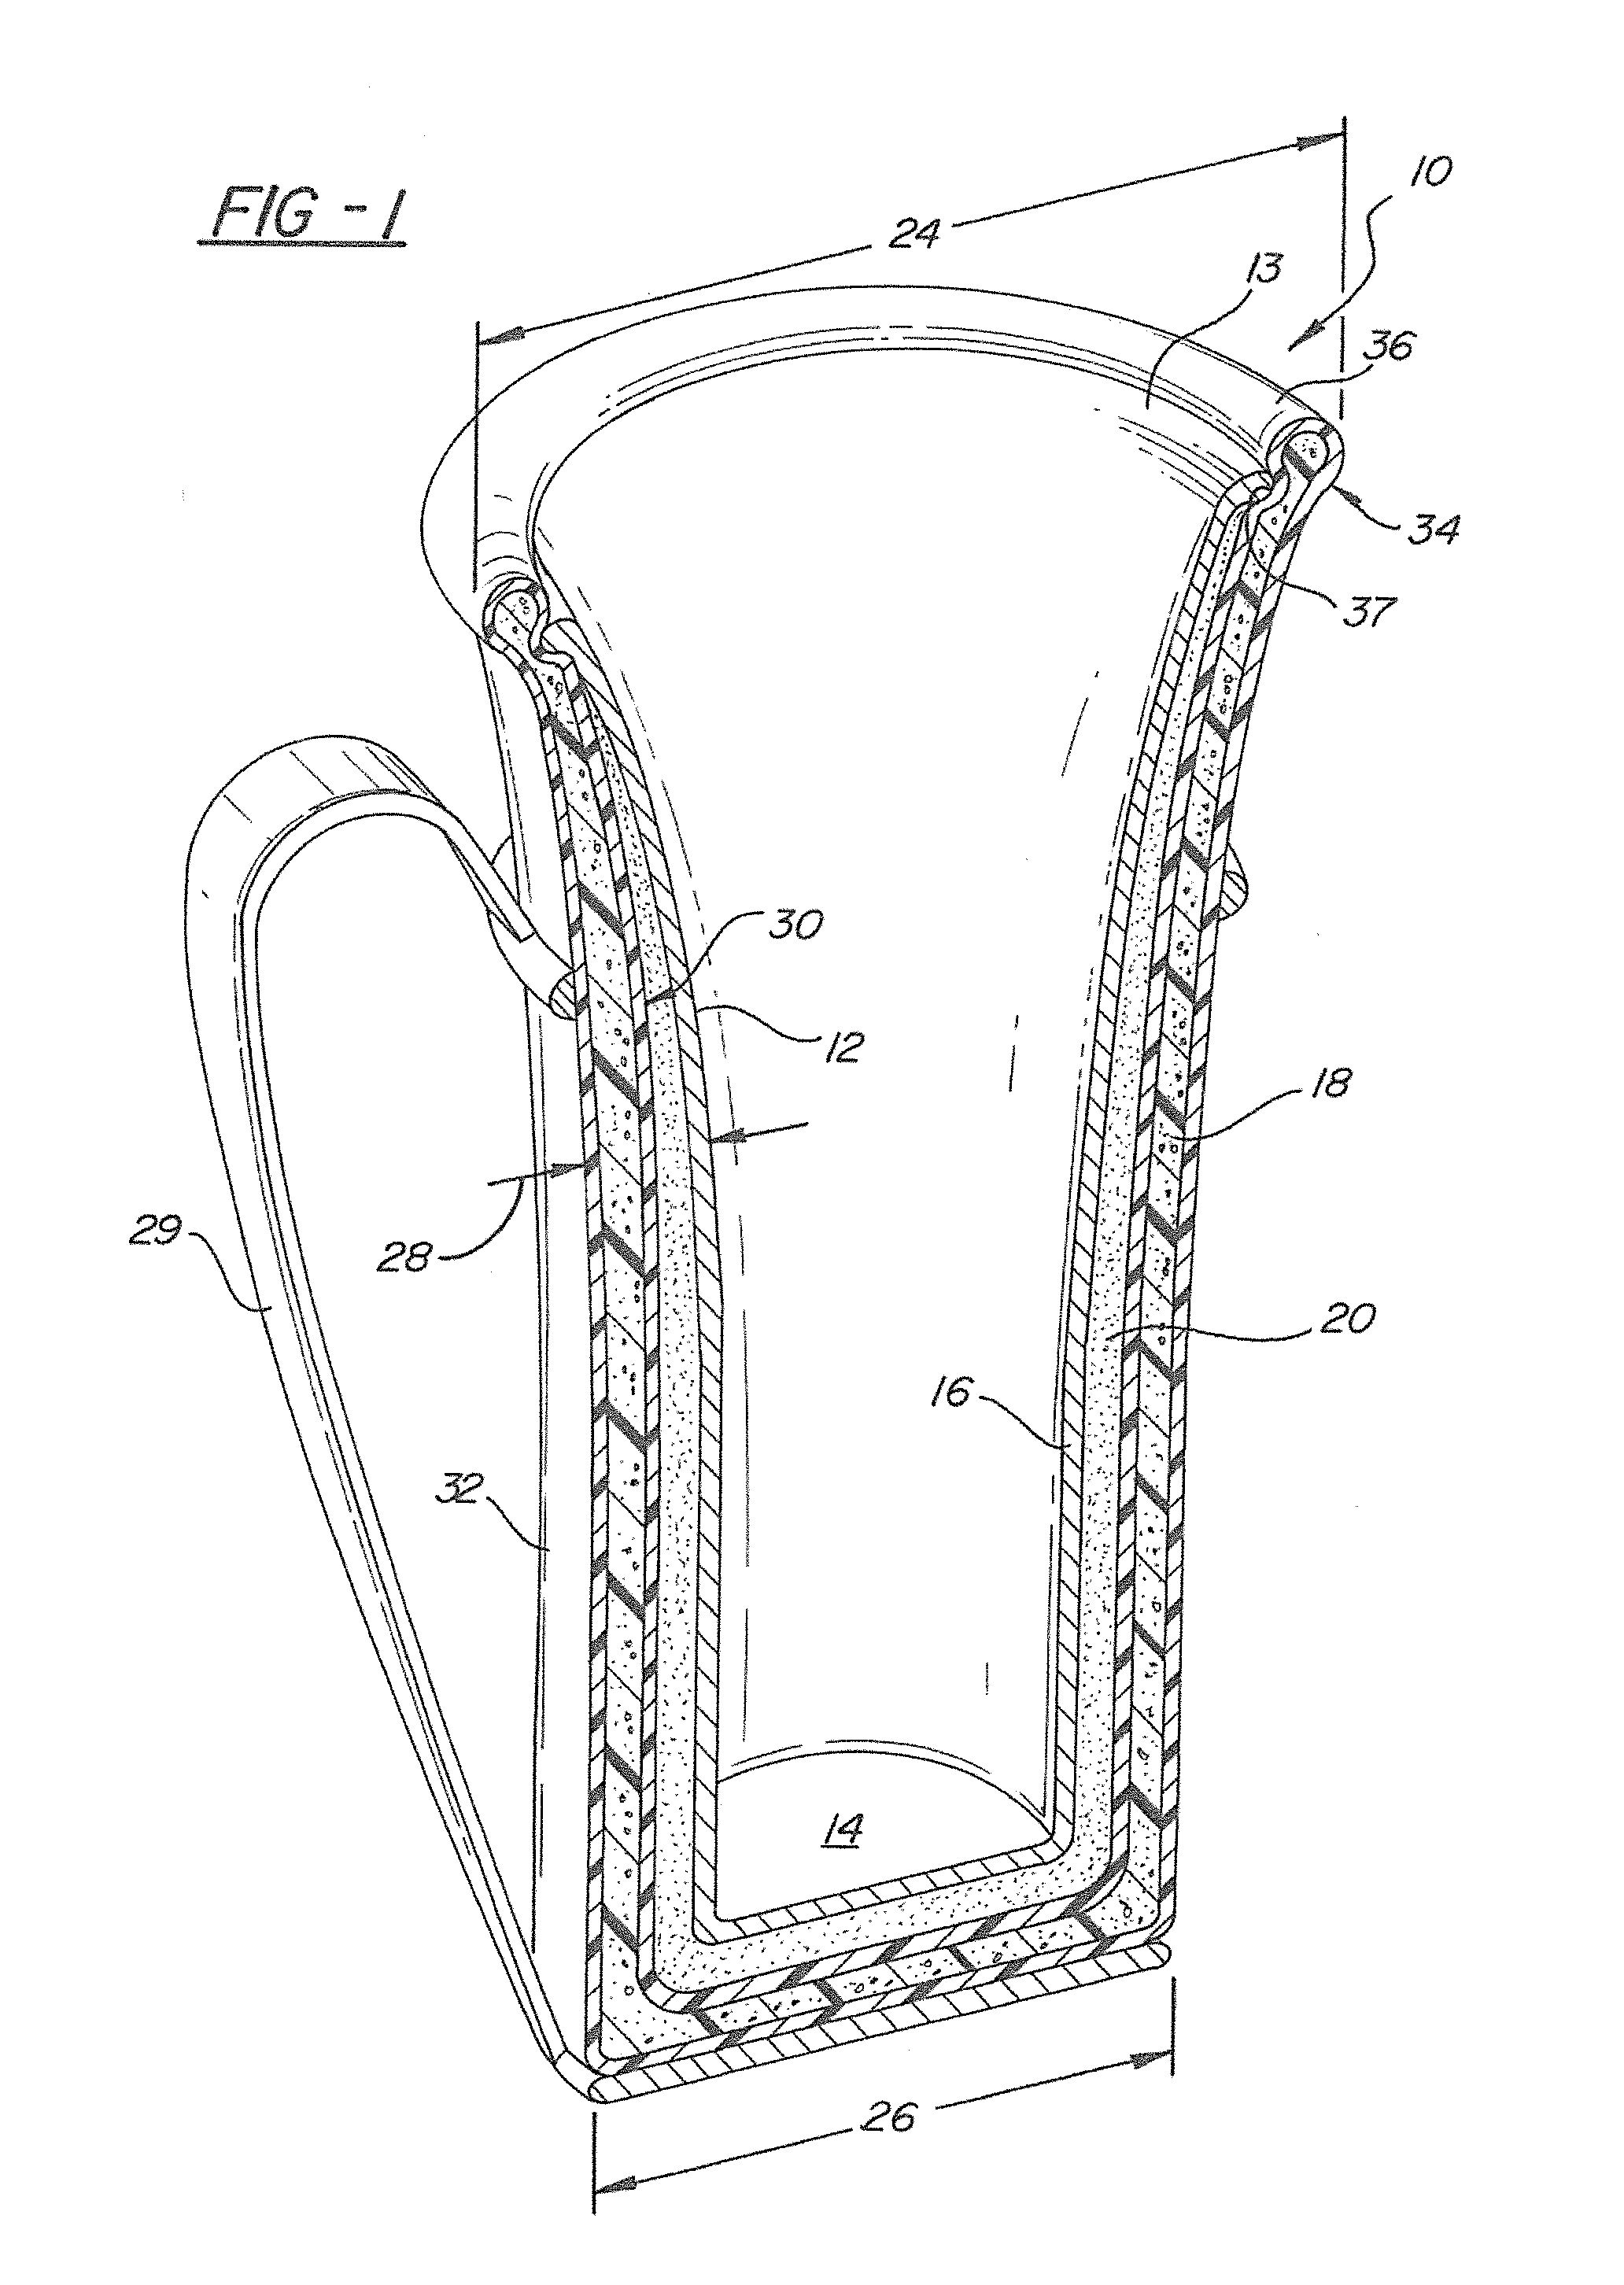 Thermal receptacle with phase change material